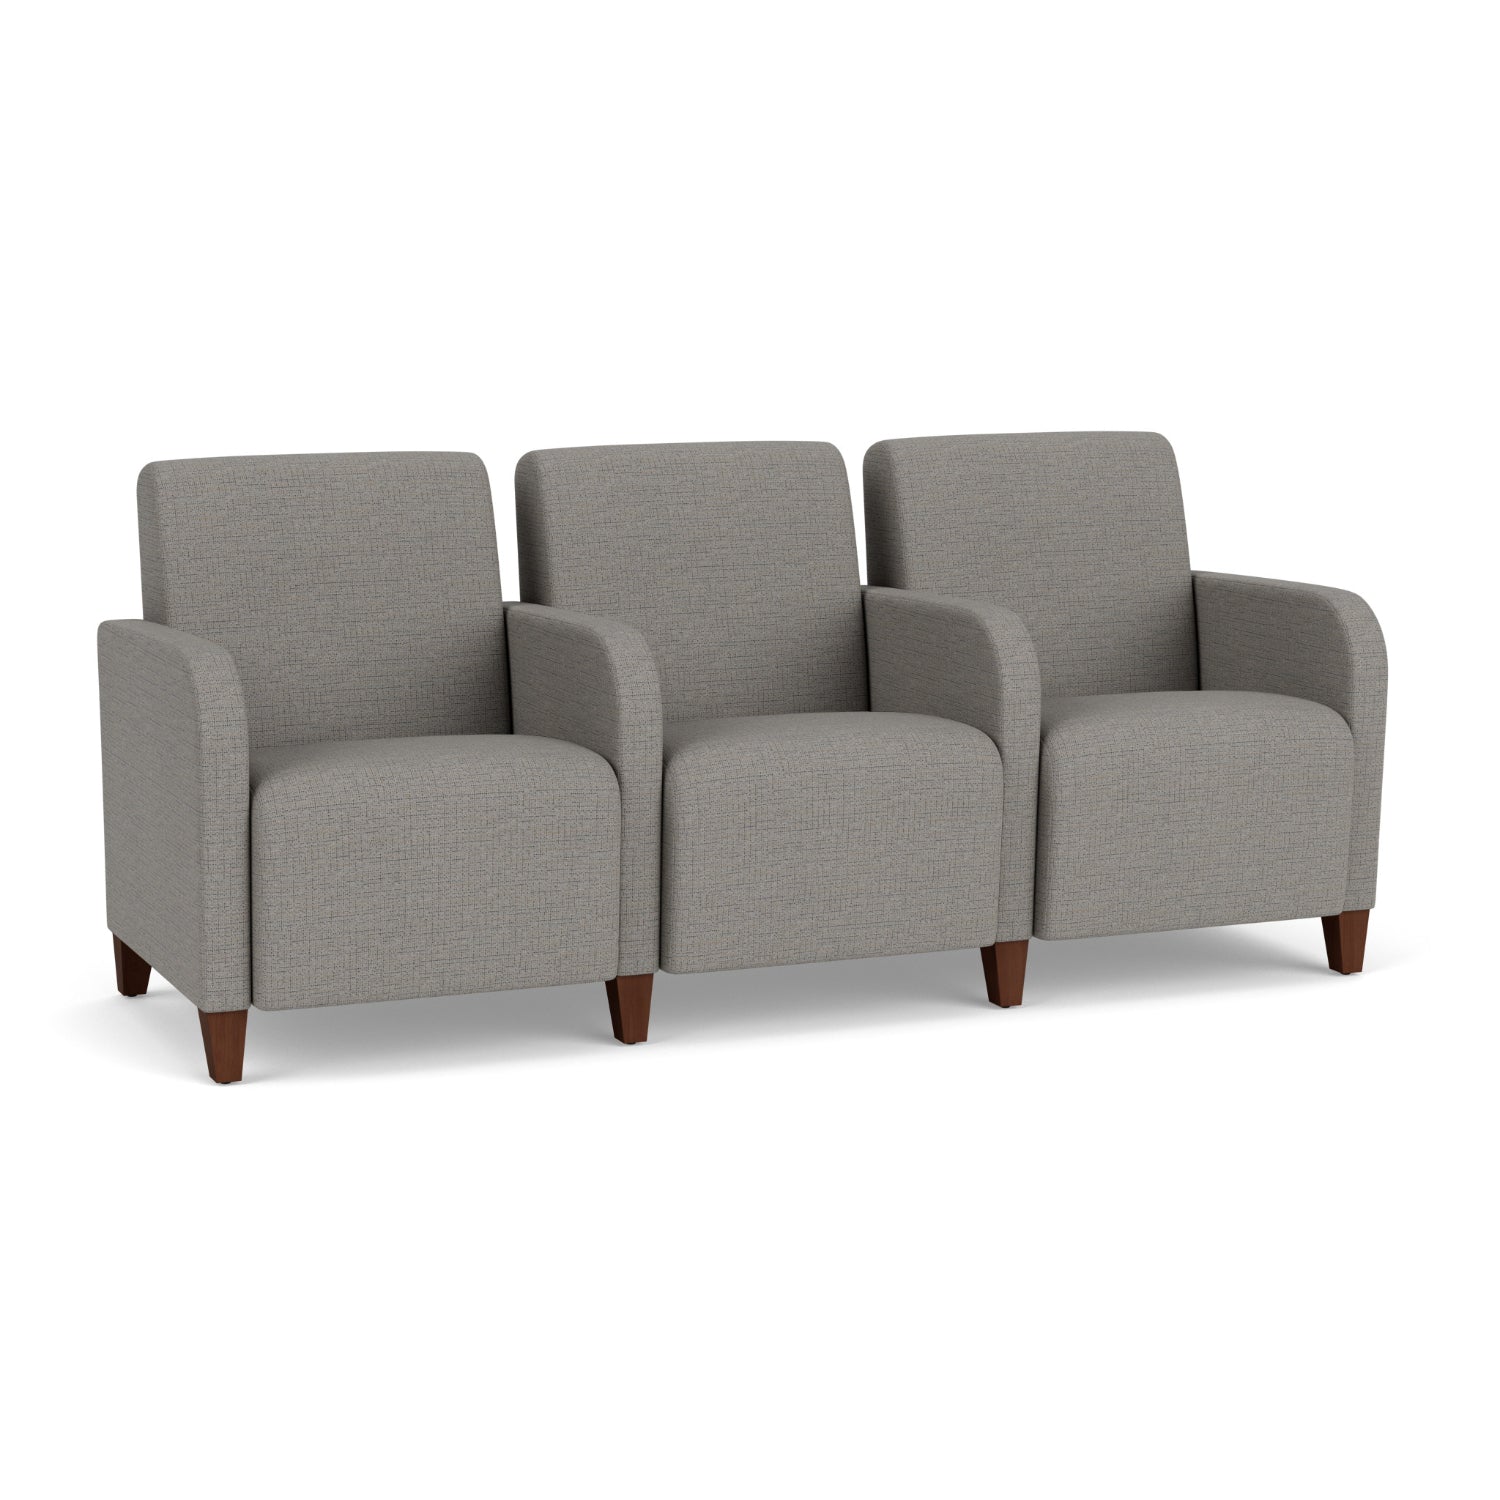 Siena Collection Reception Seating, 3-Seat Sofa with Center Arms, Designer Fabric Upholstery, FREE SHIPPING